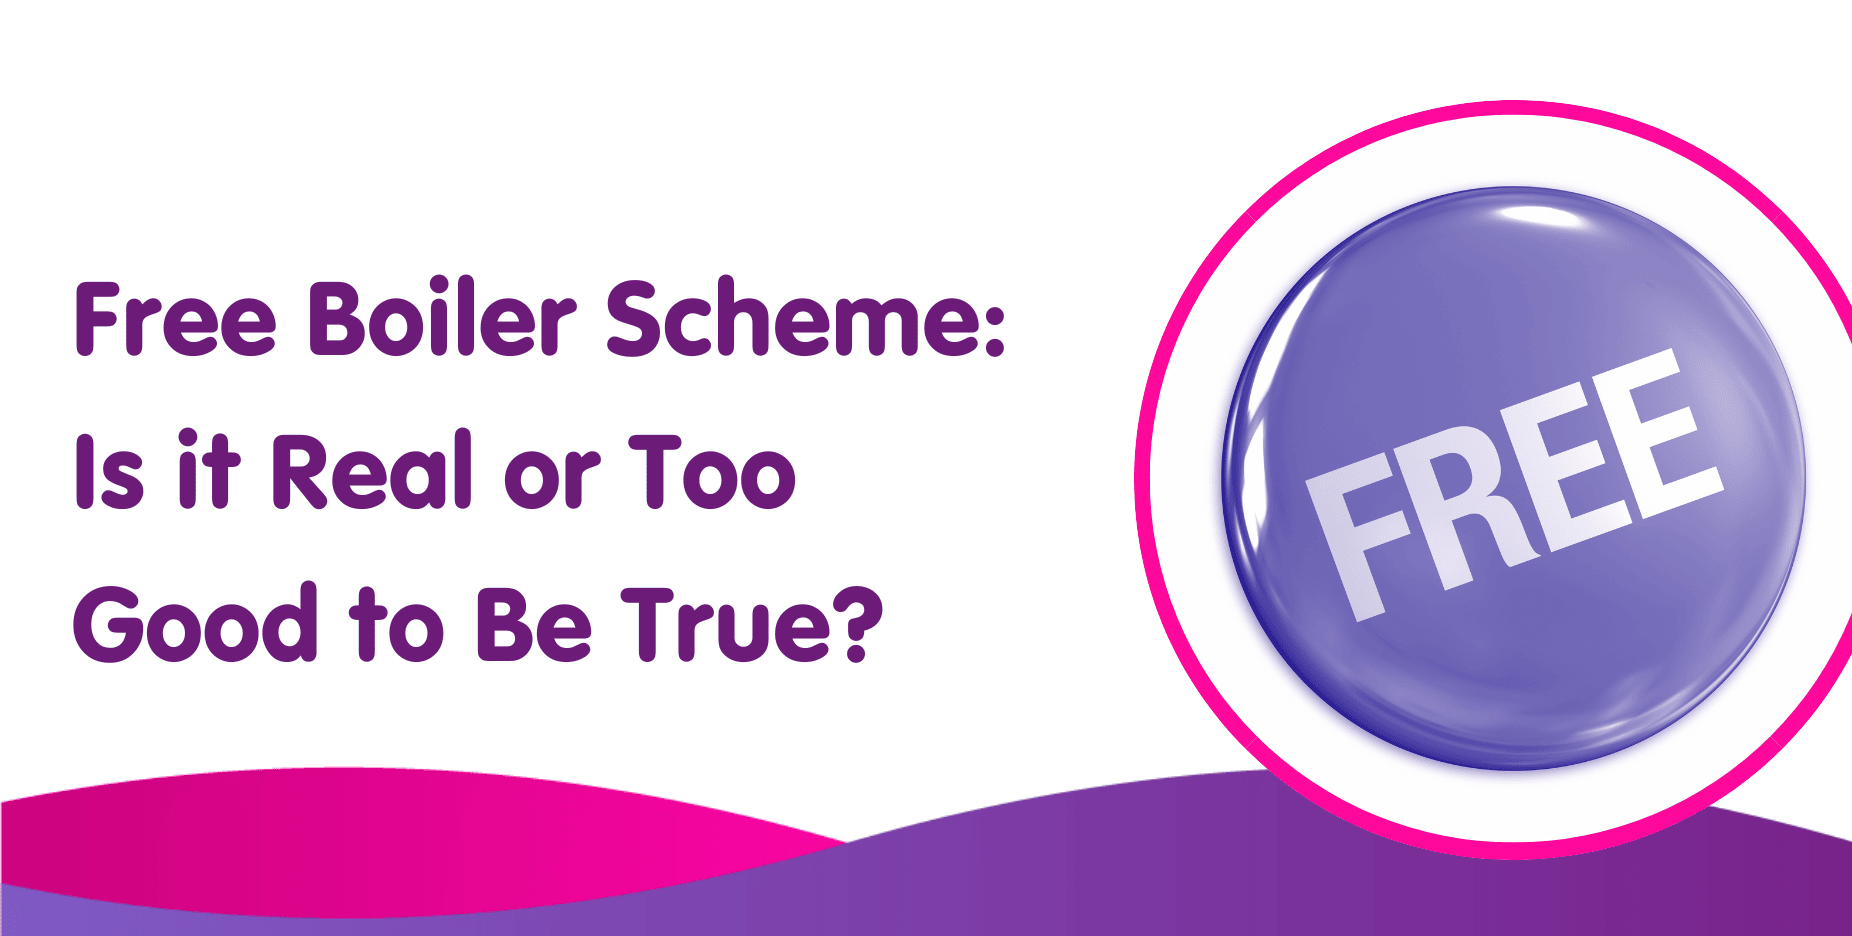 Free Boiler Scheme: Is it Real or Too Good to Be True?